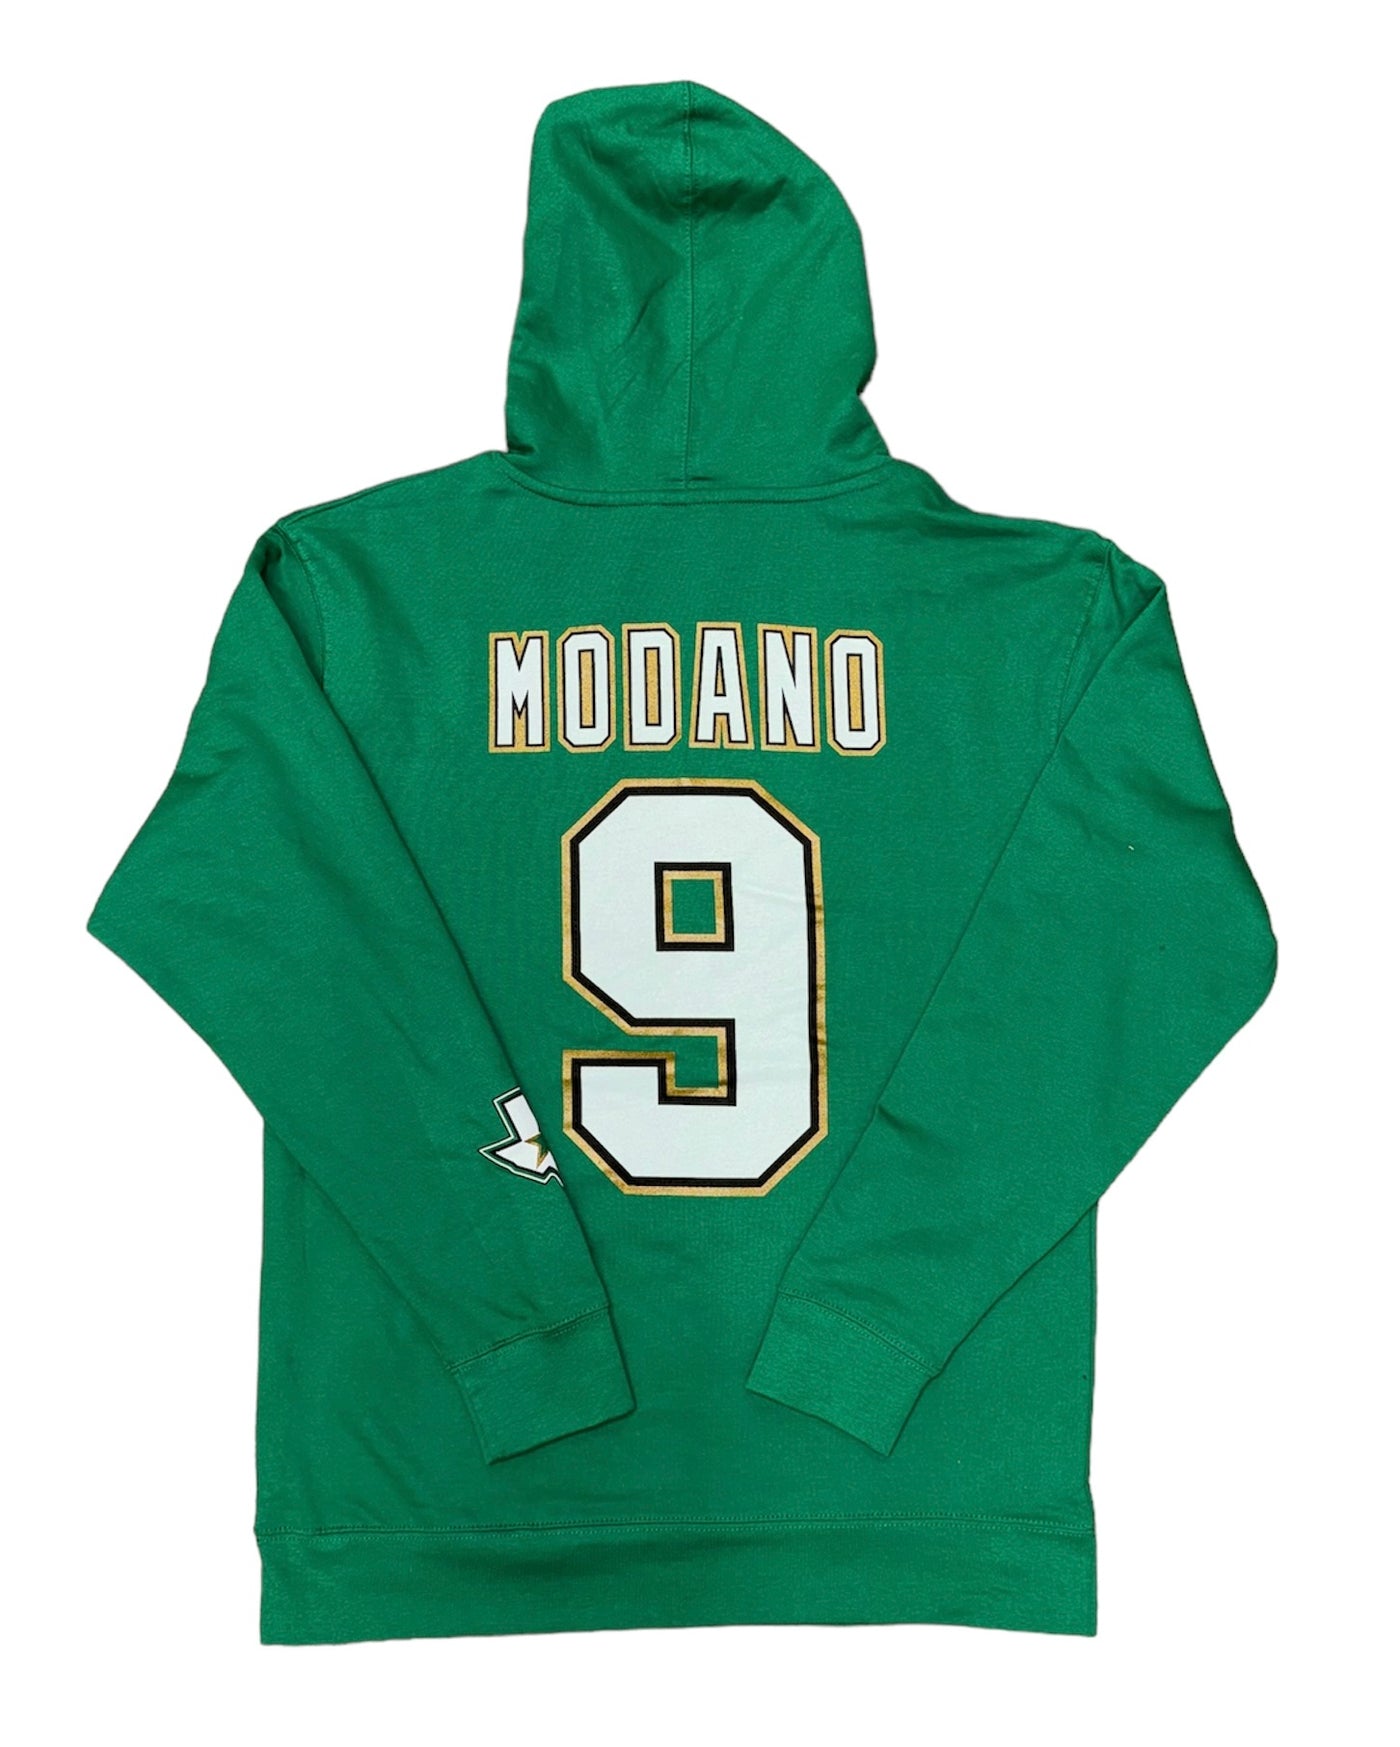 DALLAS STARS MITCHELL & NESS MIKE MODANO ICON NAME & NUMBER HOODIE - back view 